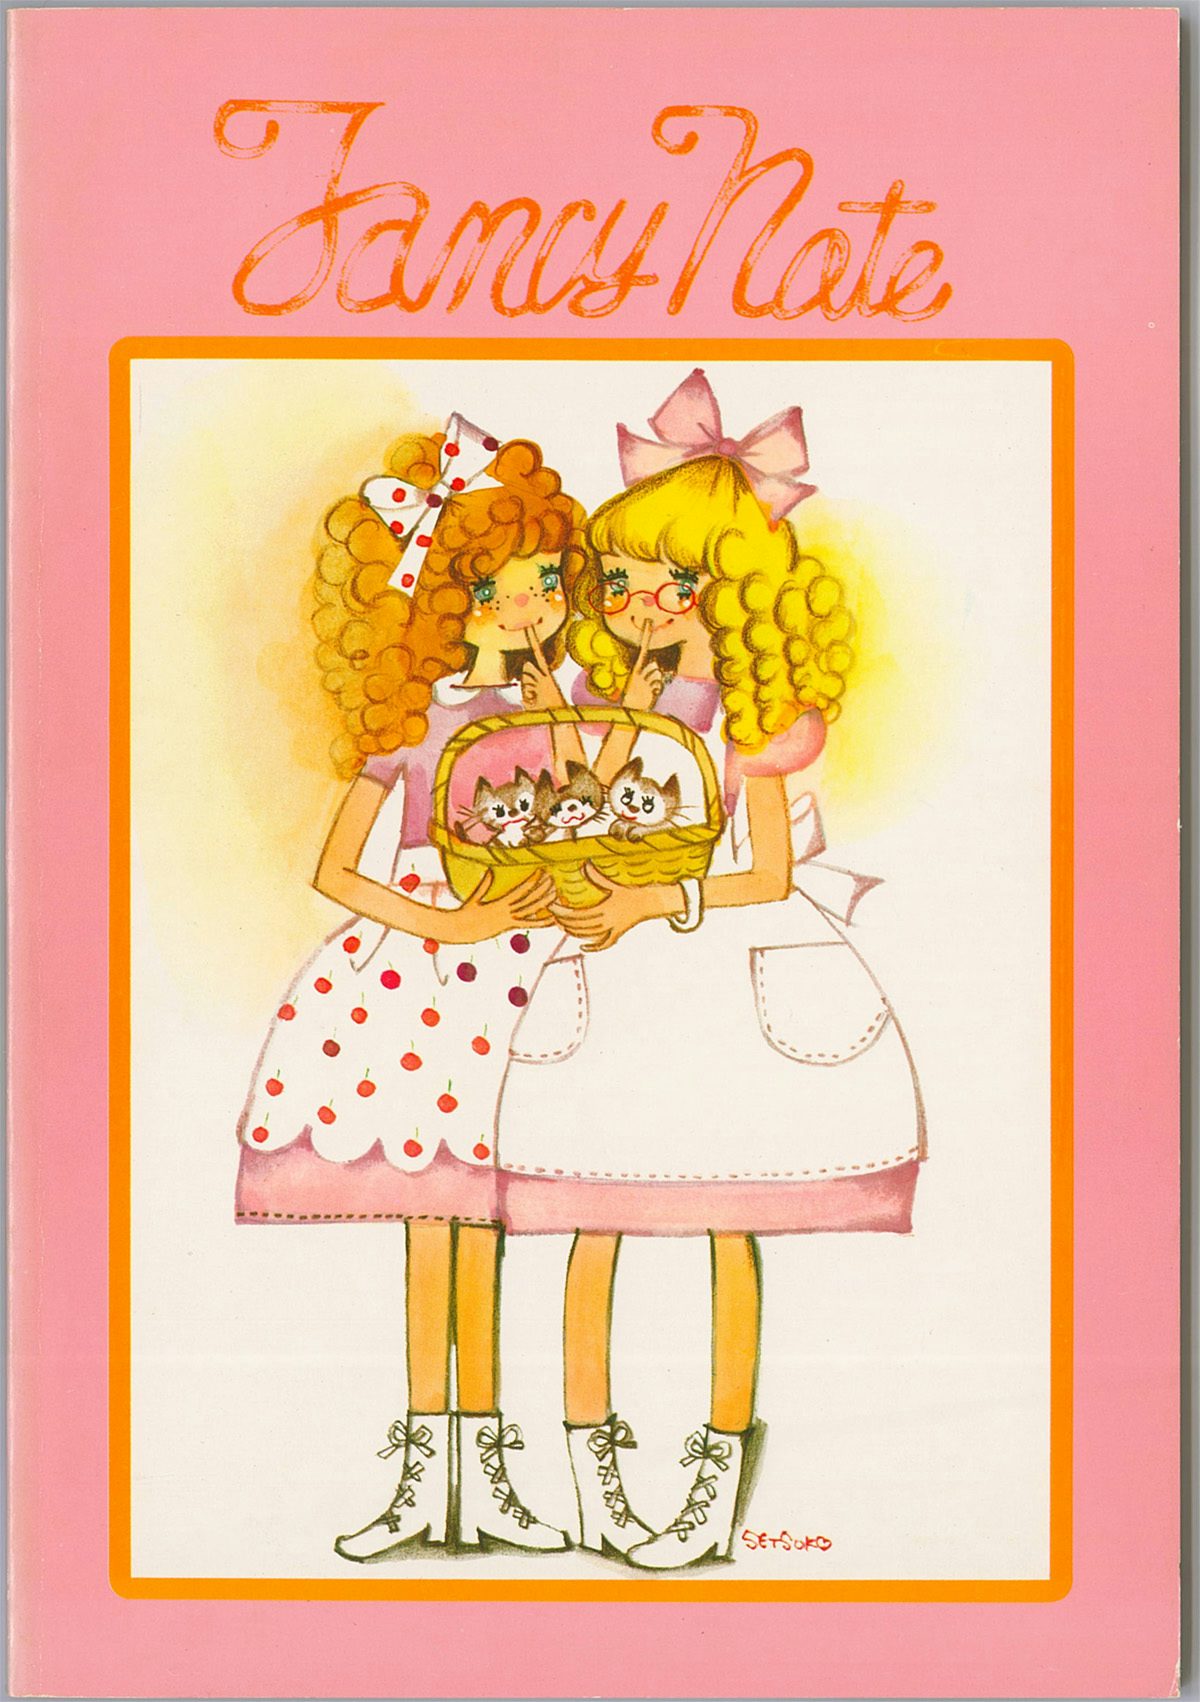 Image of a pink notebook with a cover illustration showing two girls in puffy dresses on show at the Somerset House exhibition Cute